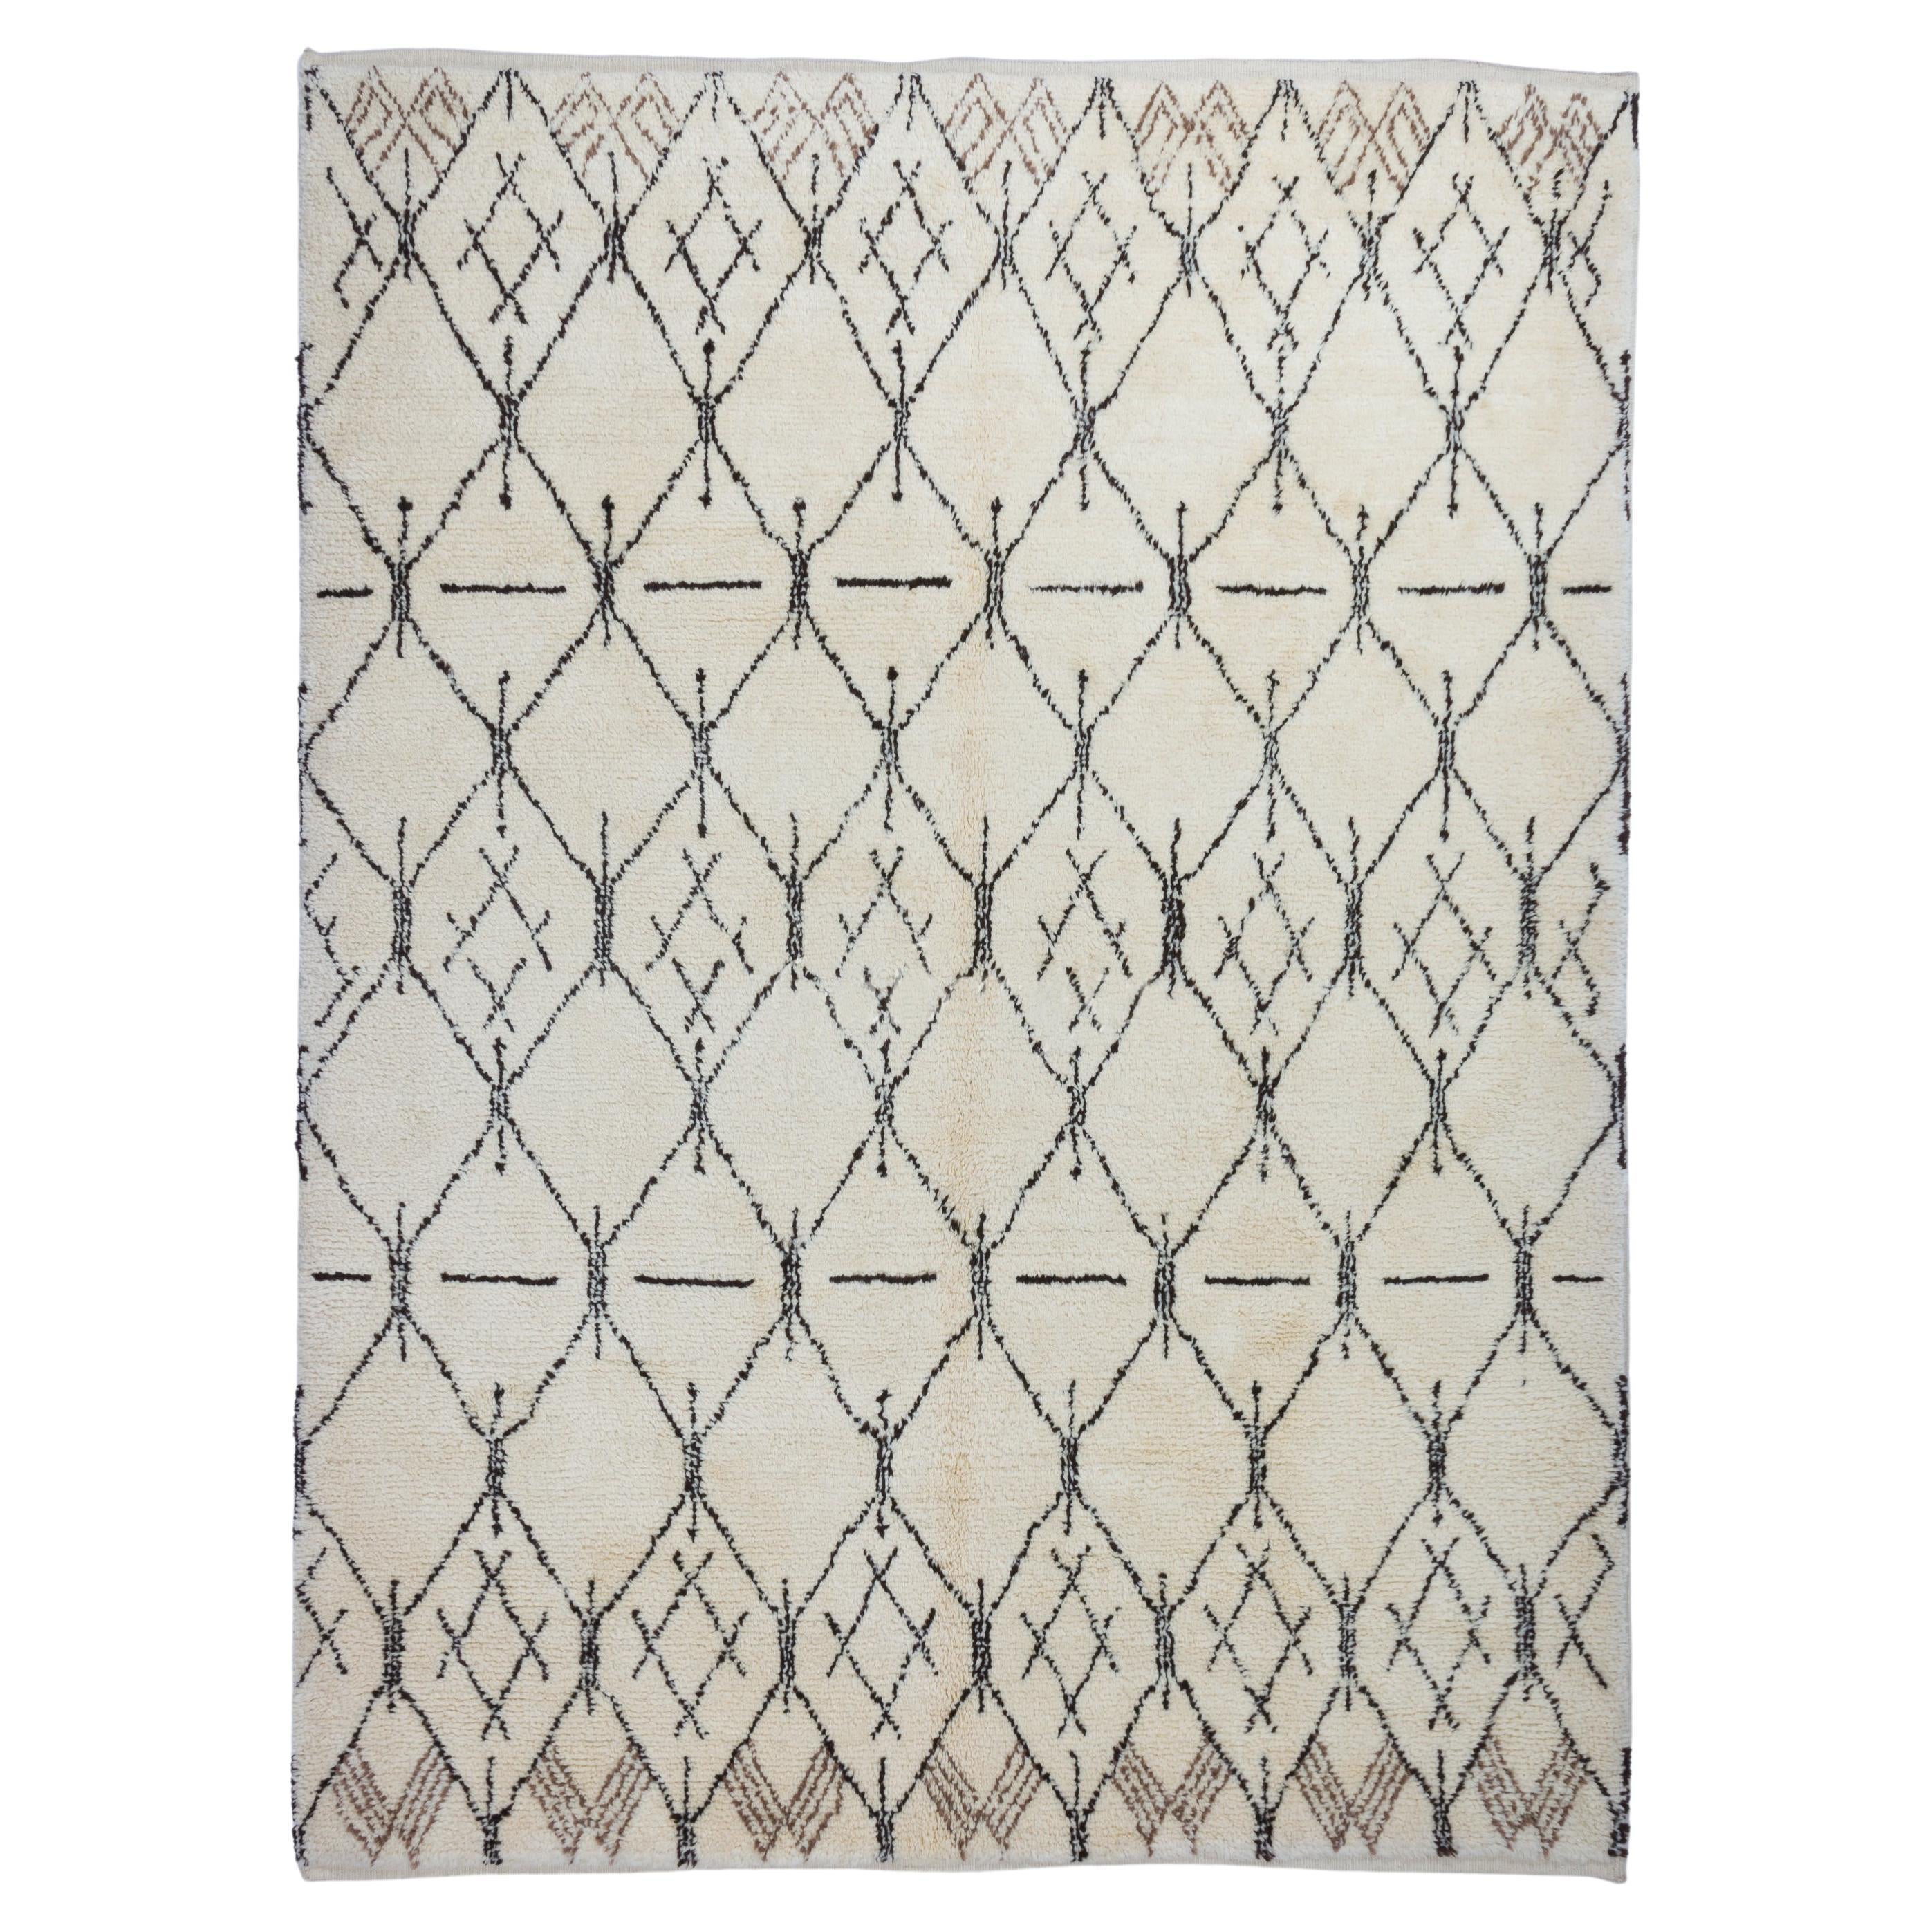 Contemporary Handmade Moroccan Rug. 100% Natural Wool. Custom Options Available For Sale